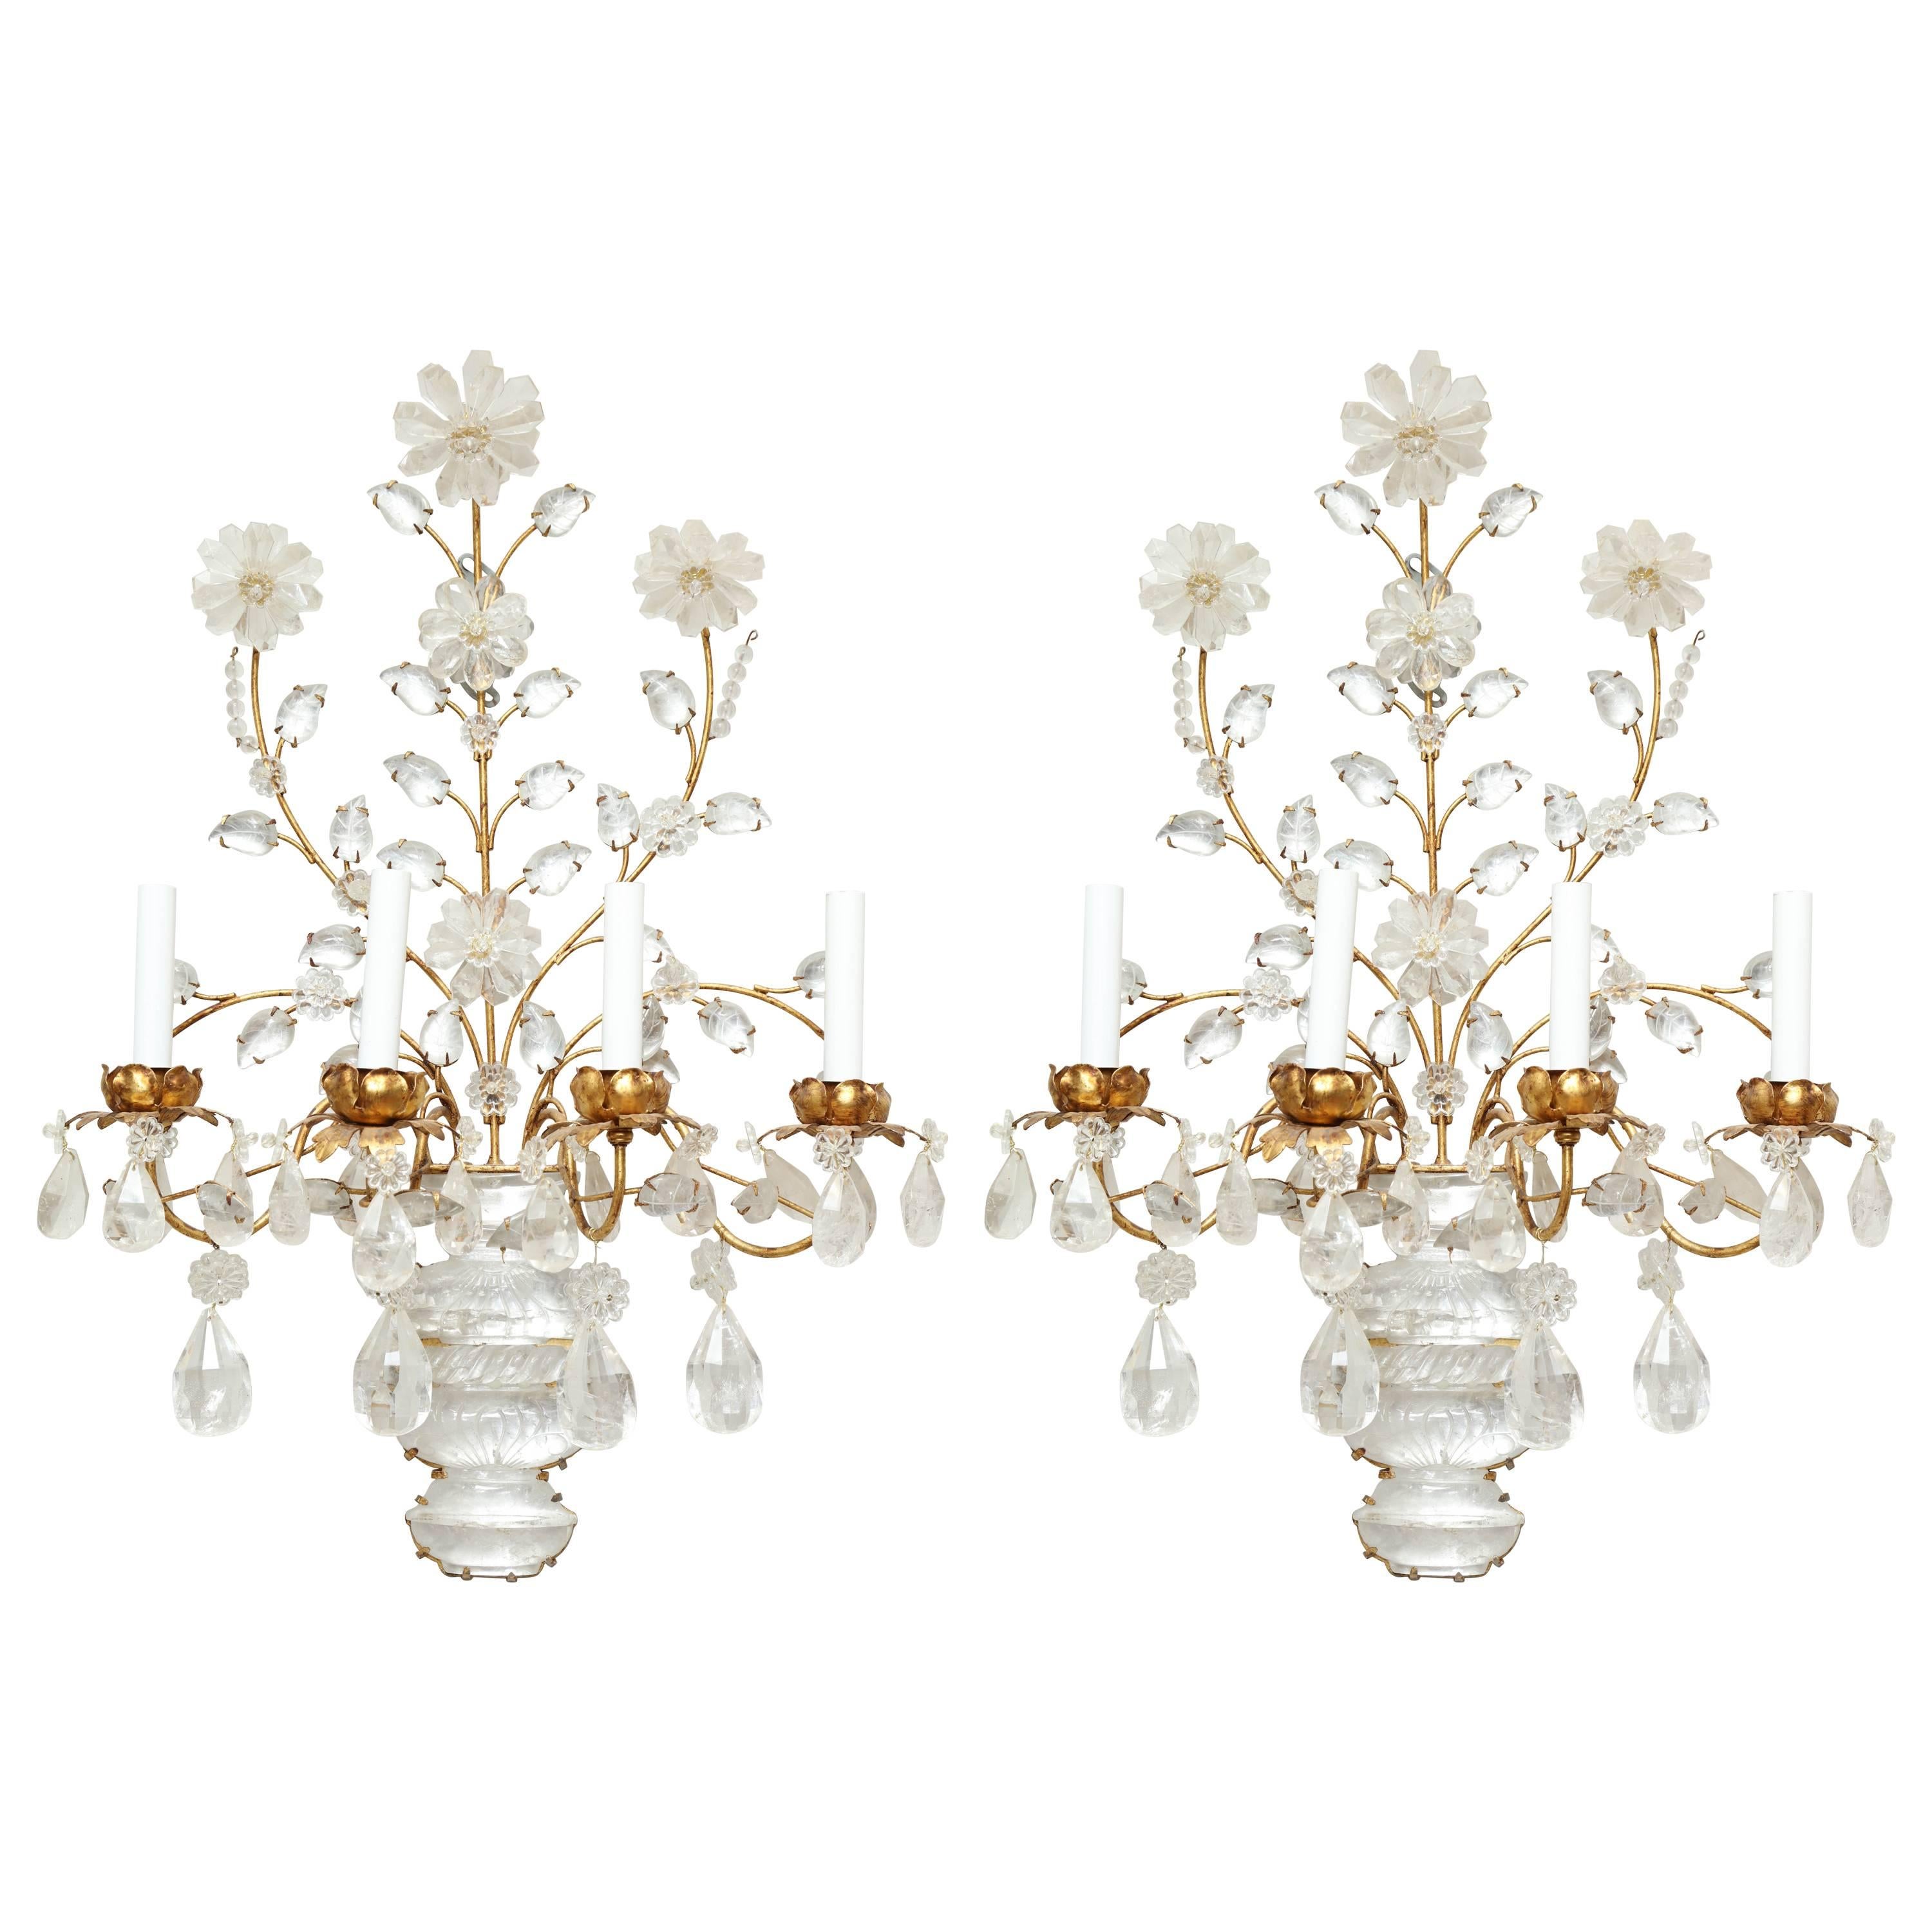 Pair of Four Light Wall Sconces